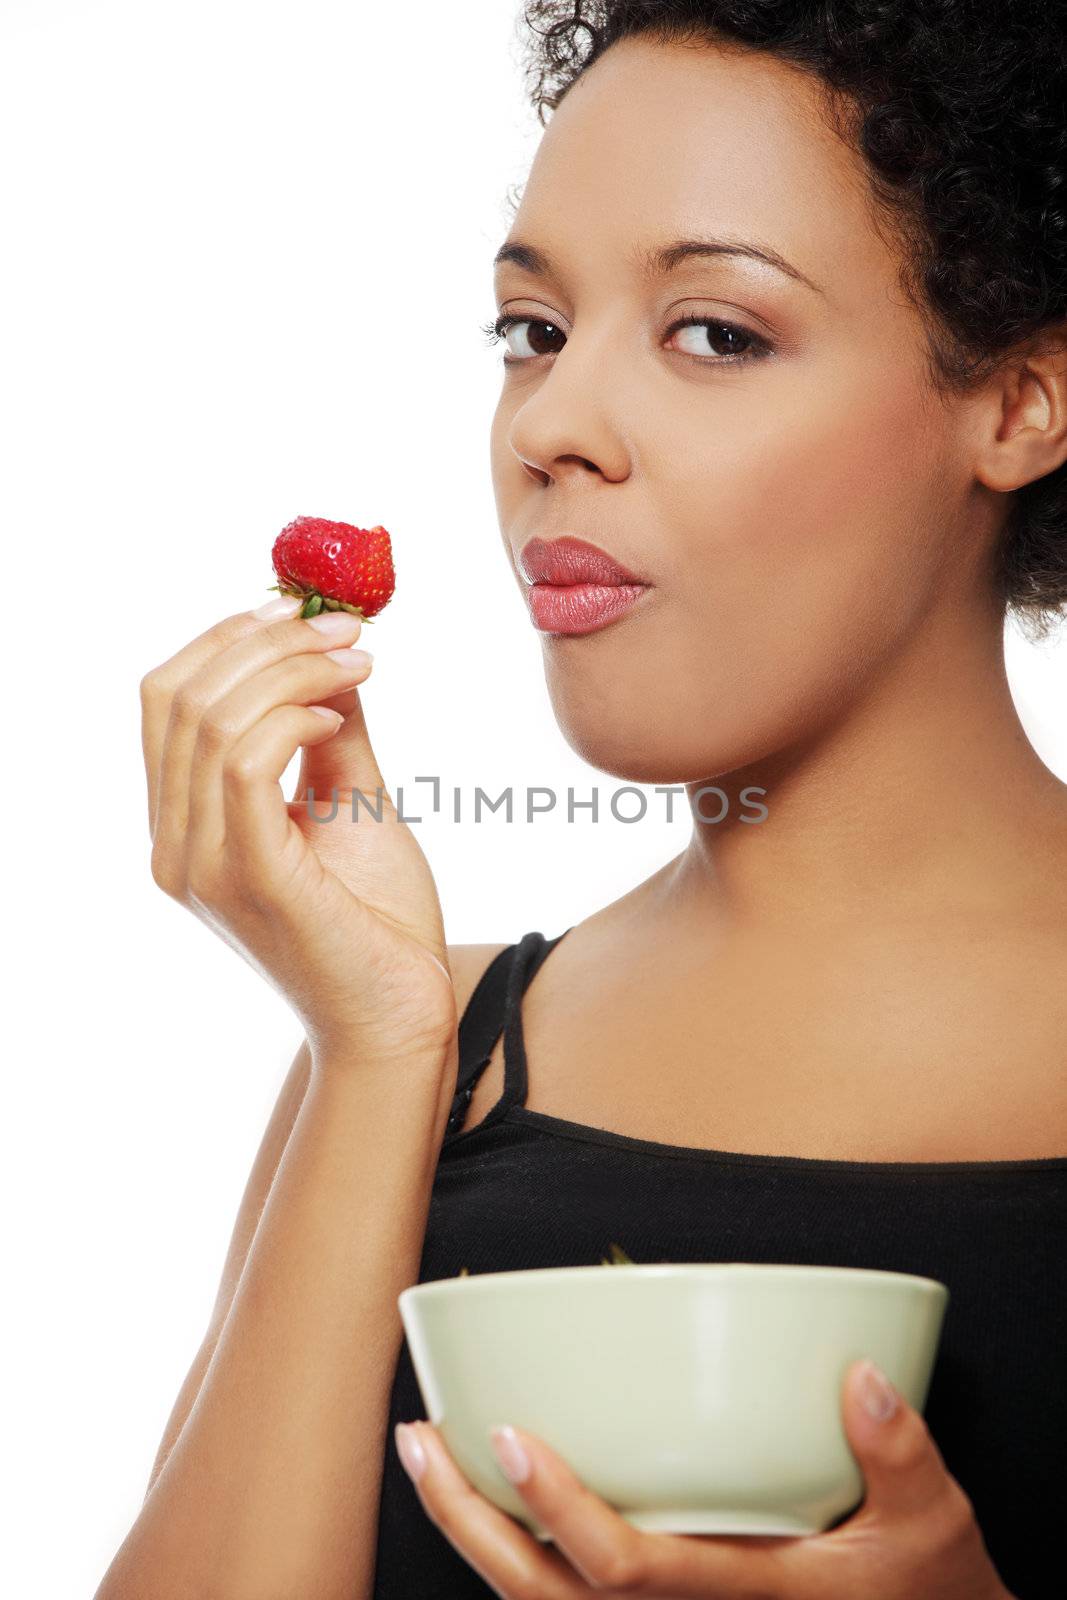 Face closeup portrait of a beautifyl young woman taking a bite of a strawberry, over a white background.